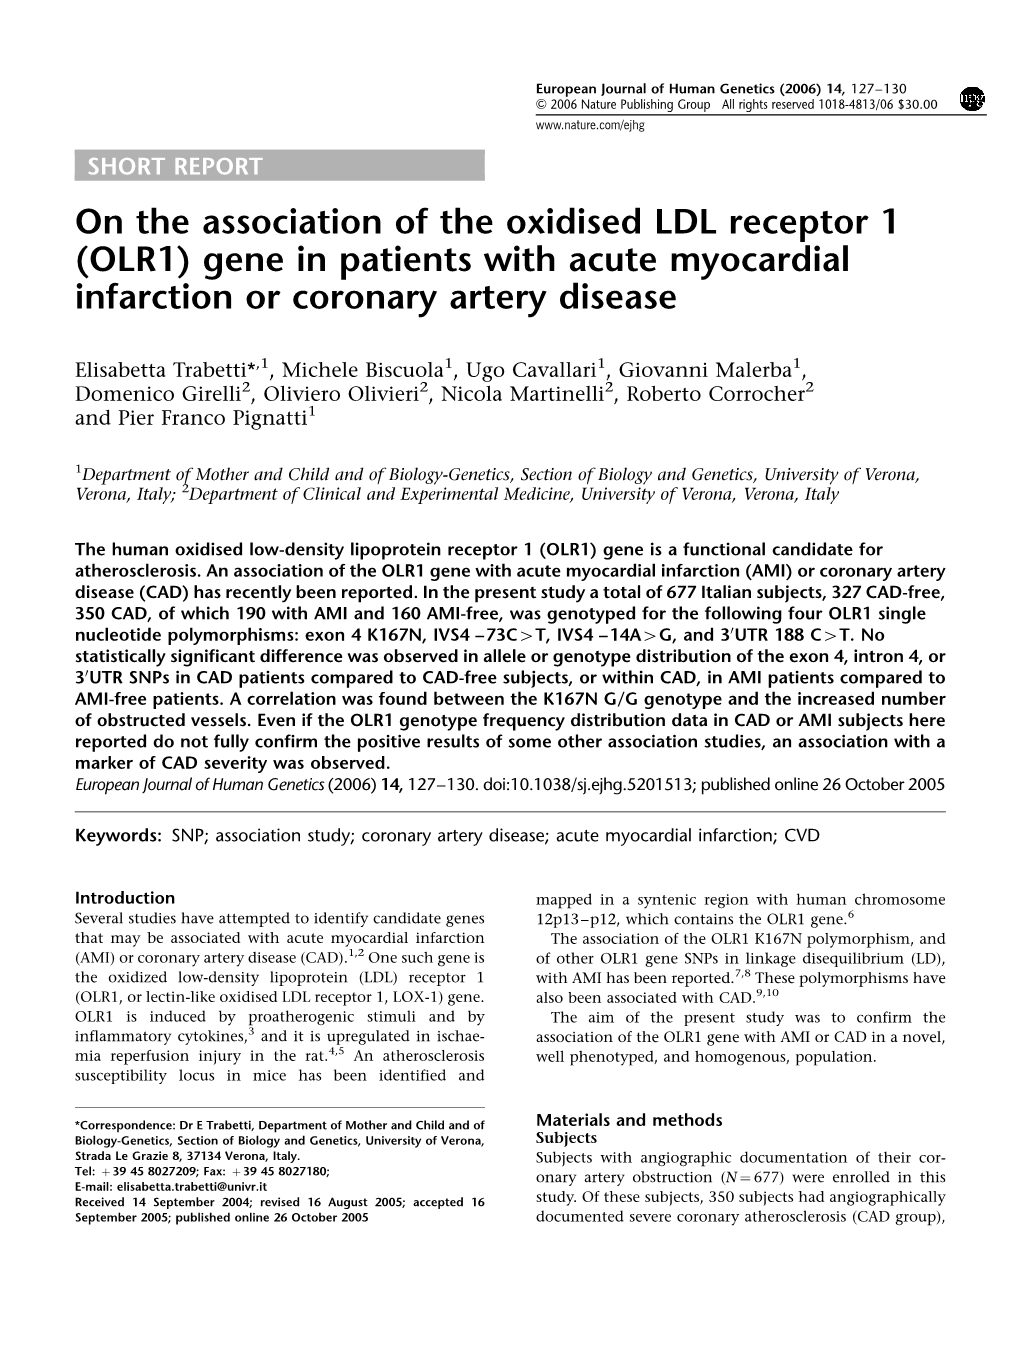 On the Association of the Oxidised LDL Receptor 1 (OLR1) Gene in Patients with Acute Myocardial Infarction Or Coronary Artery Disease